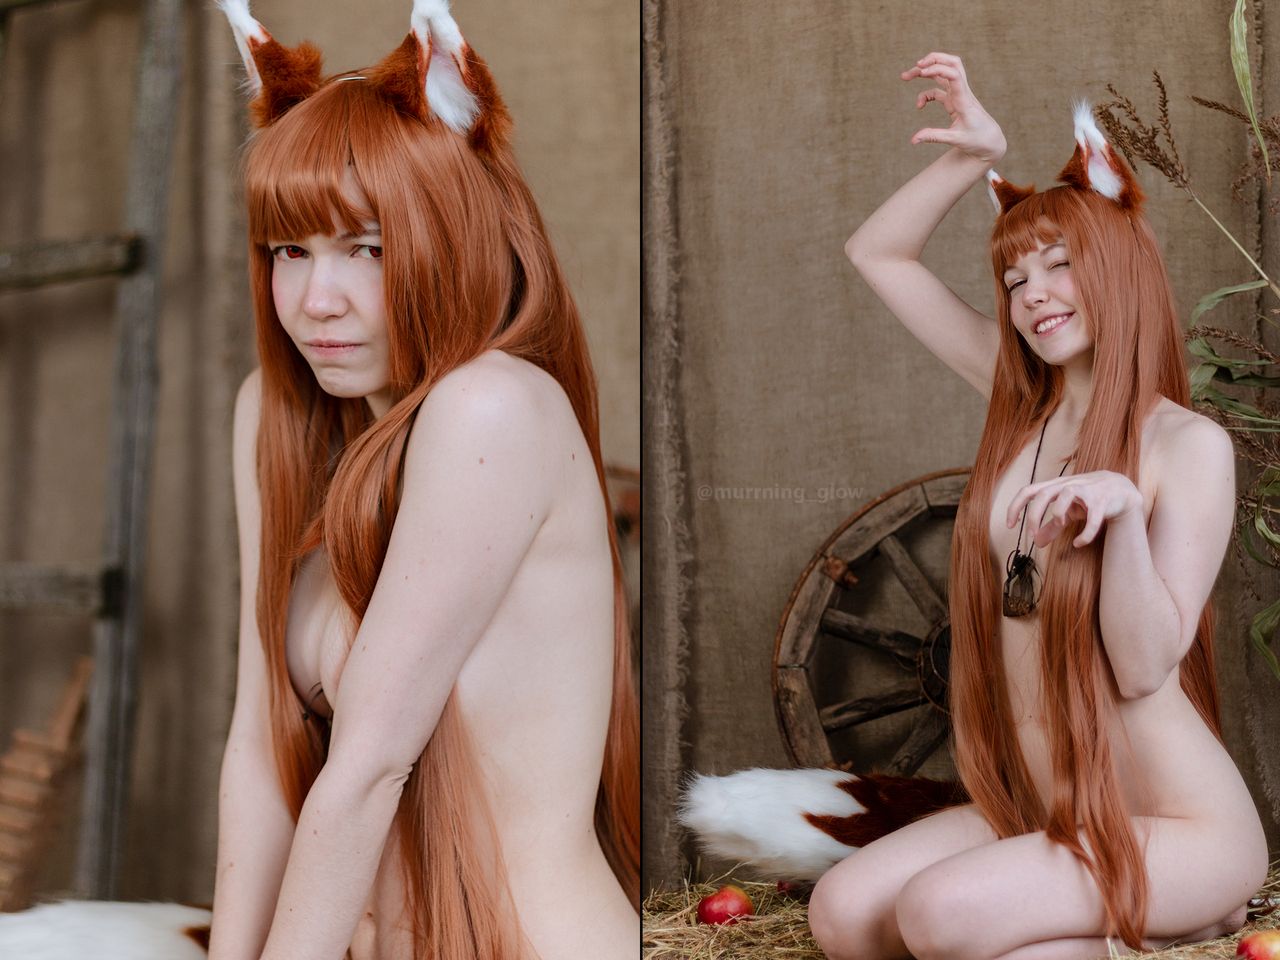 Holo From Spice And Wolf By Murrning Glo